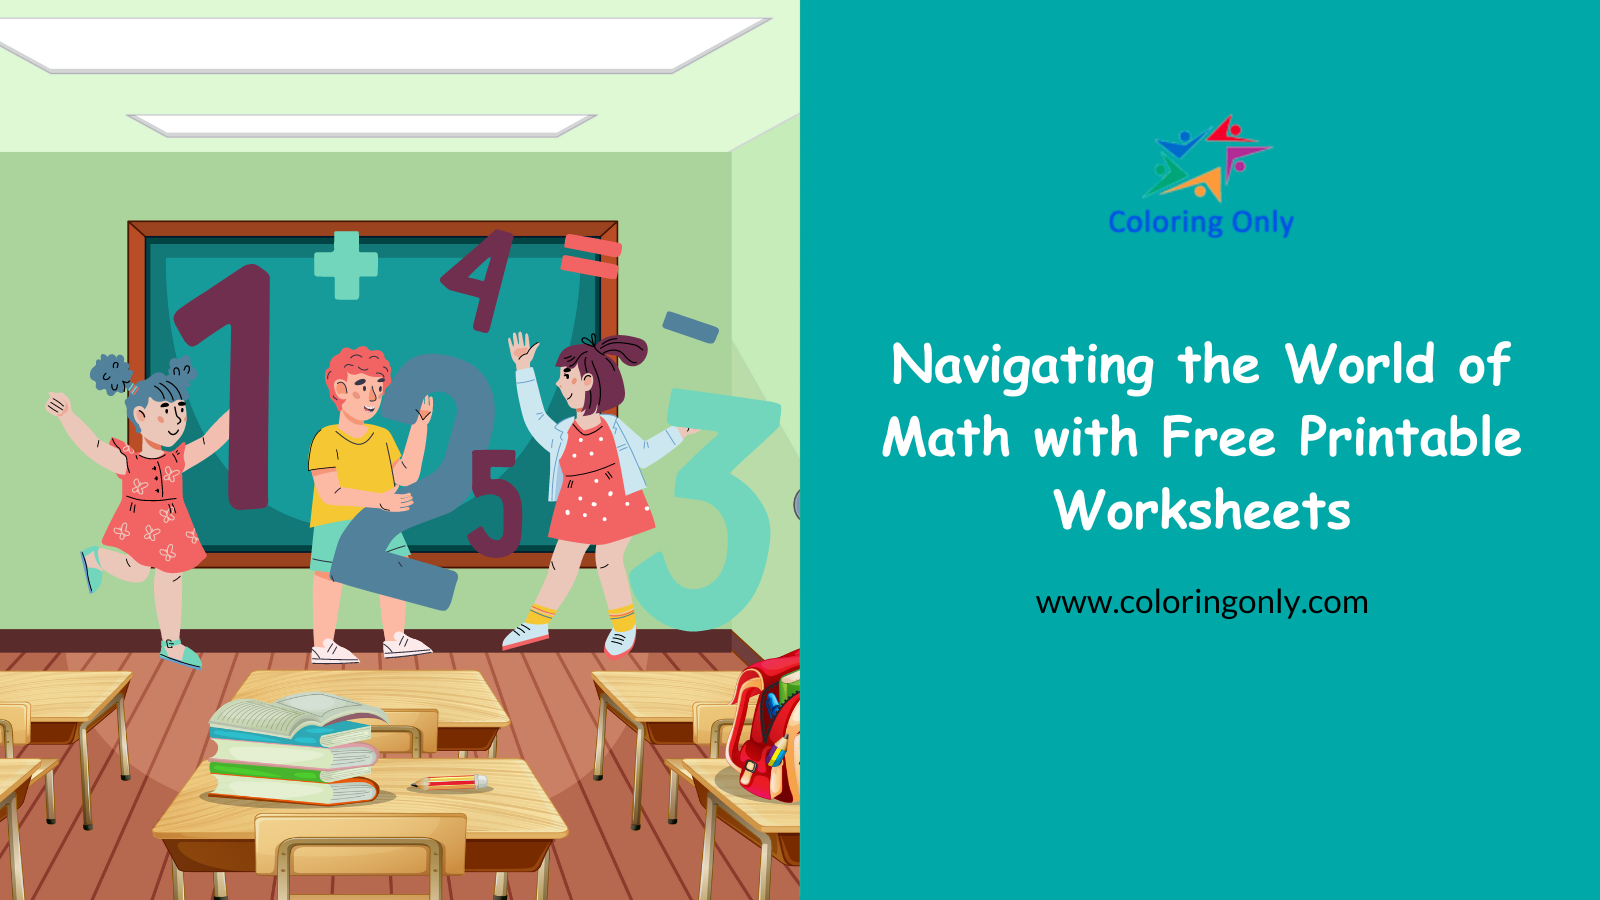 Navigating the World of Math with Free Printable Worksheets